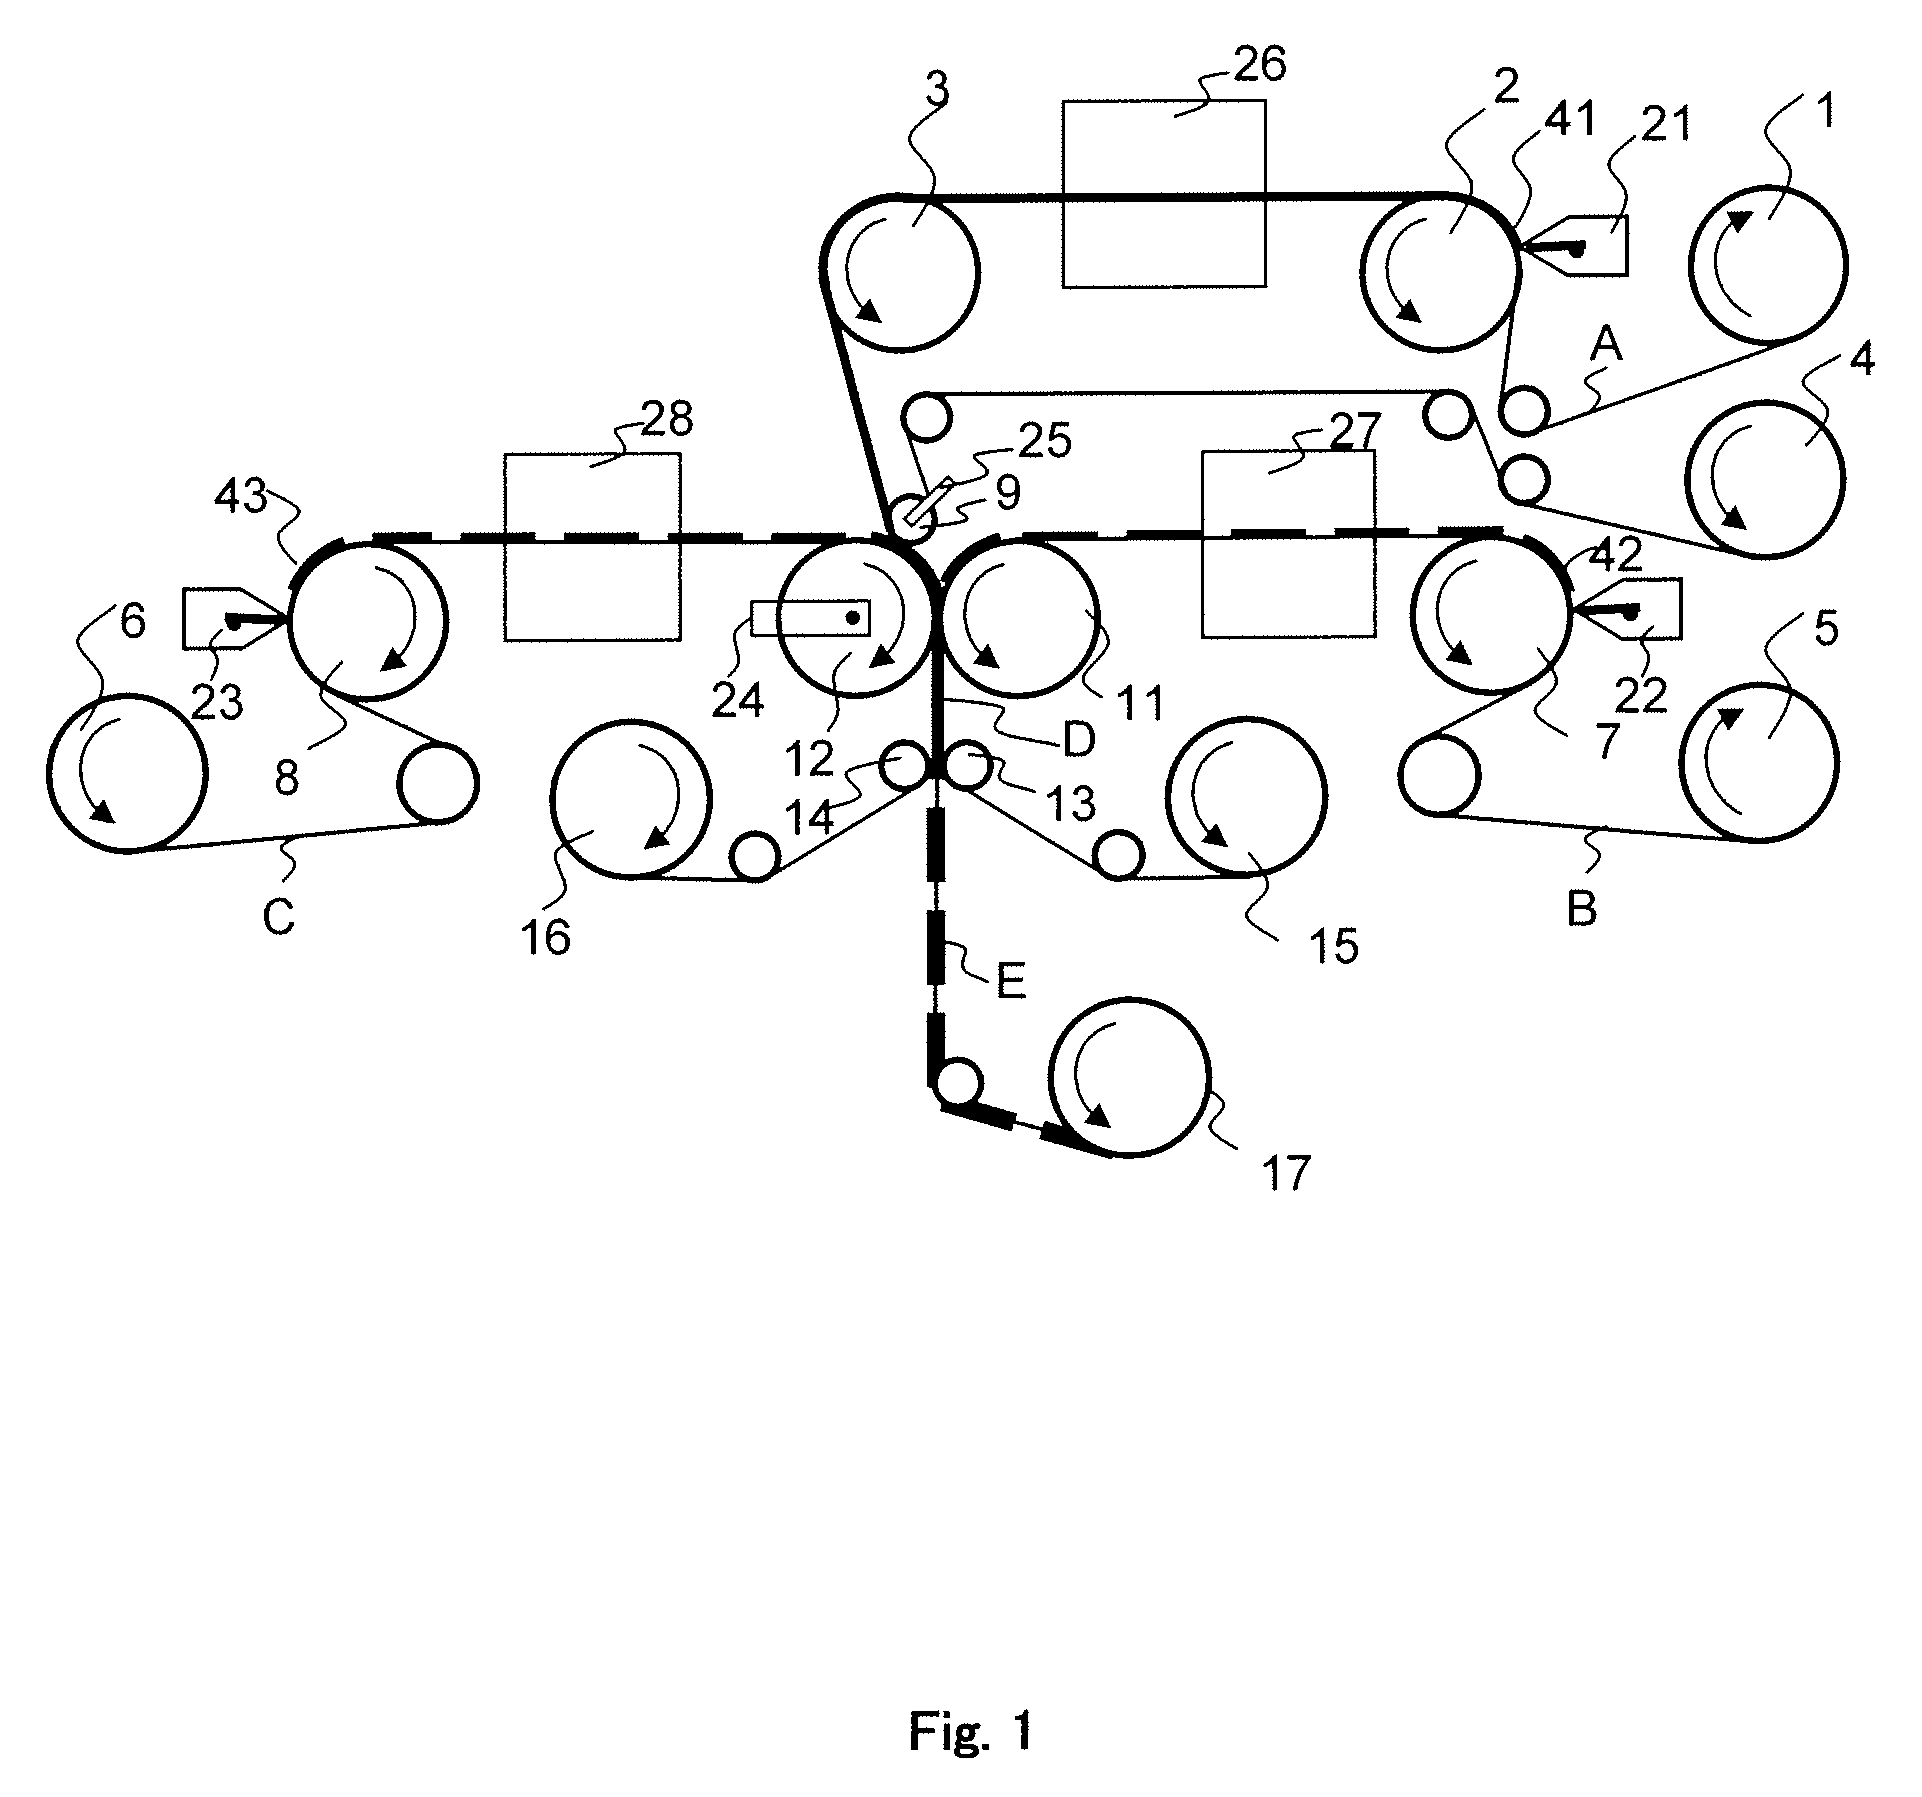 Manufacturing Equipment and Manufacturing Method of Membrane Electrode Assembly